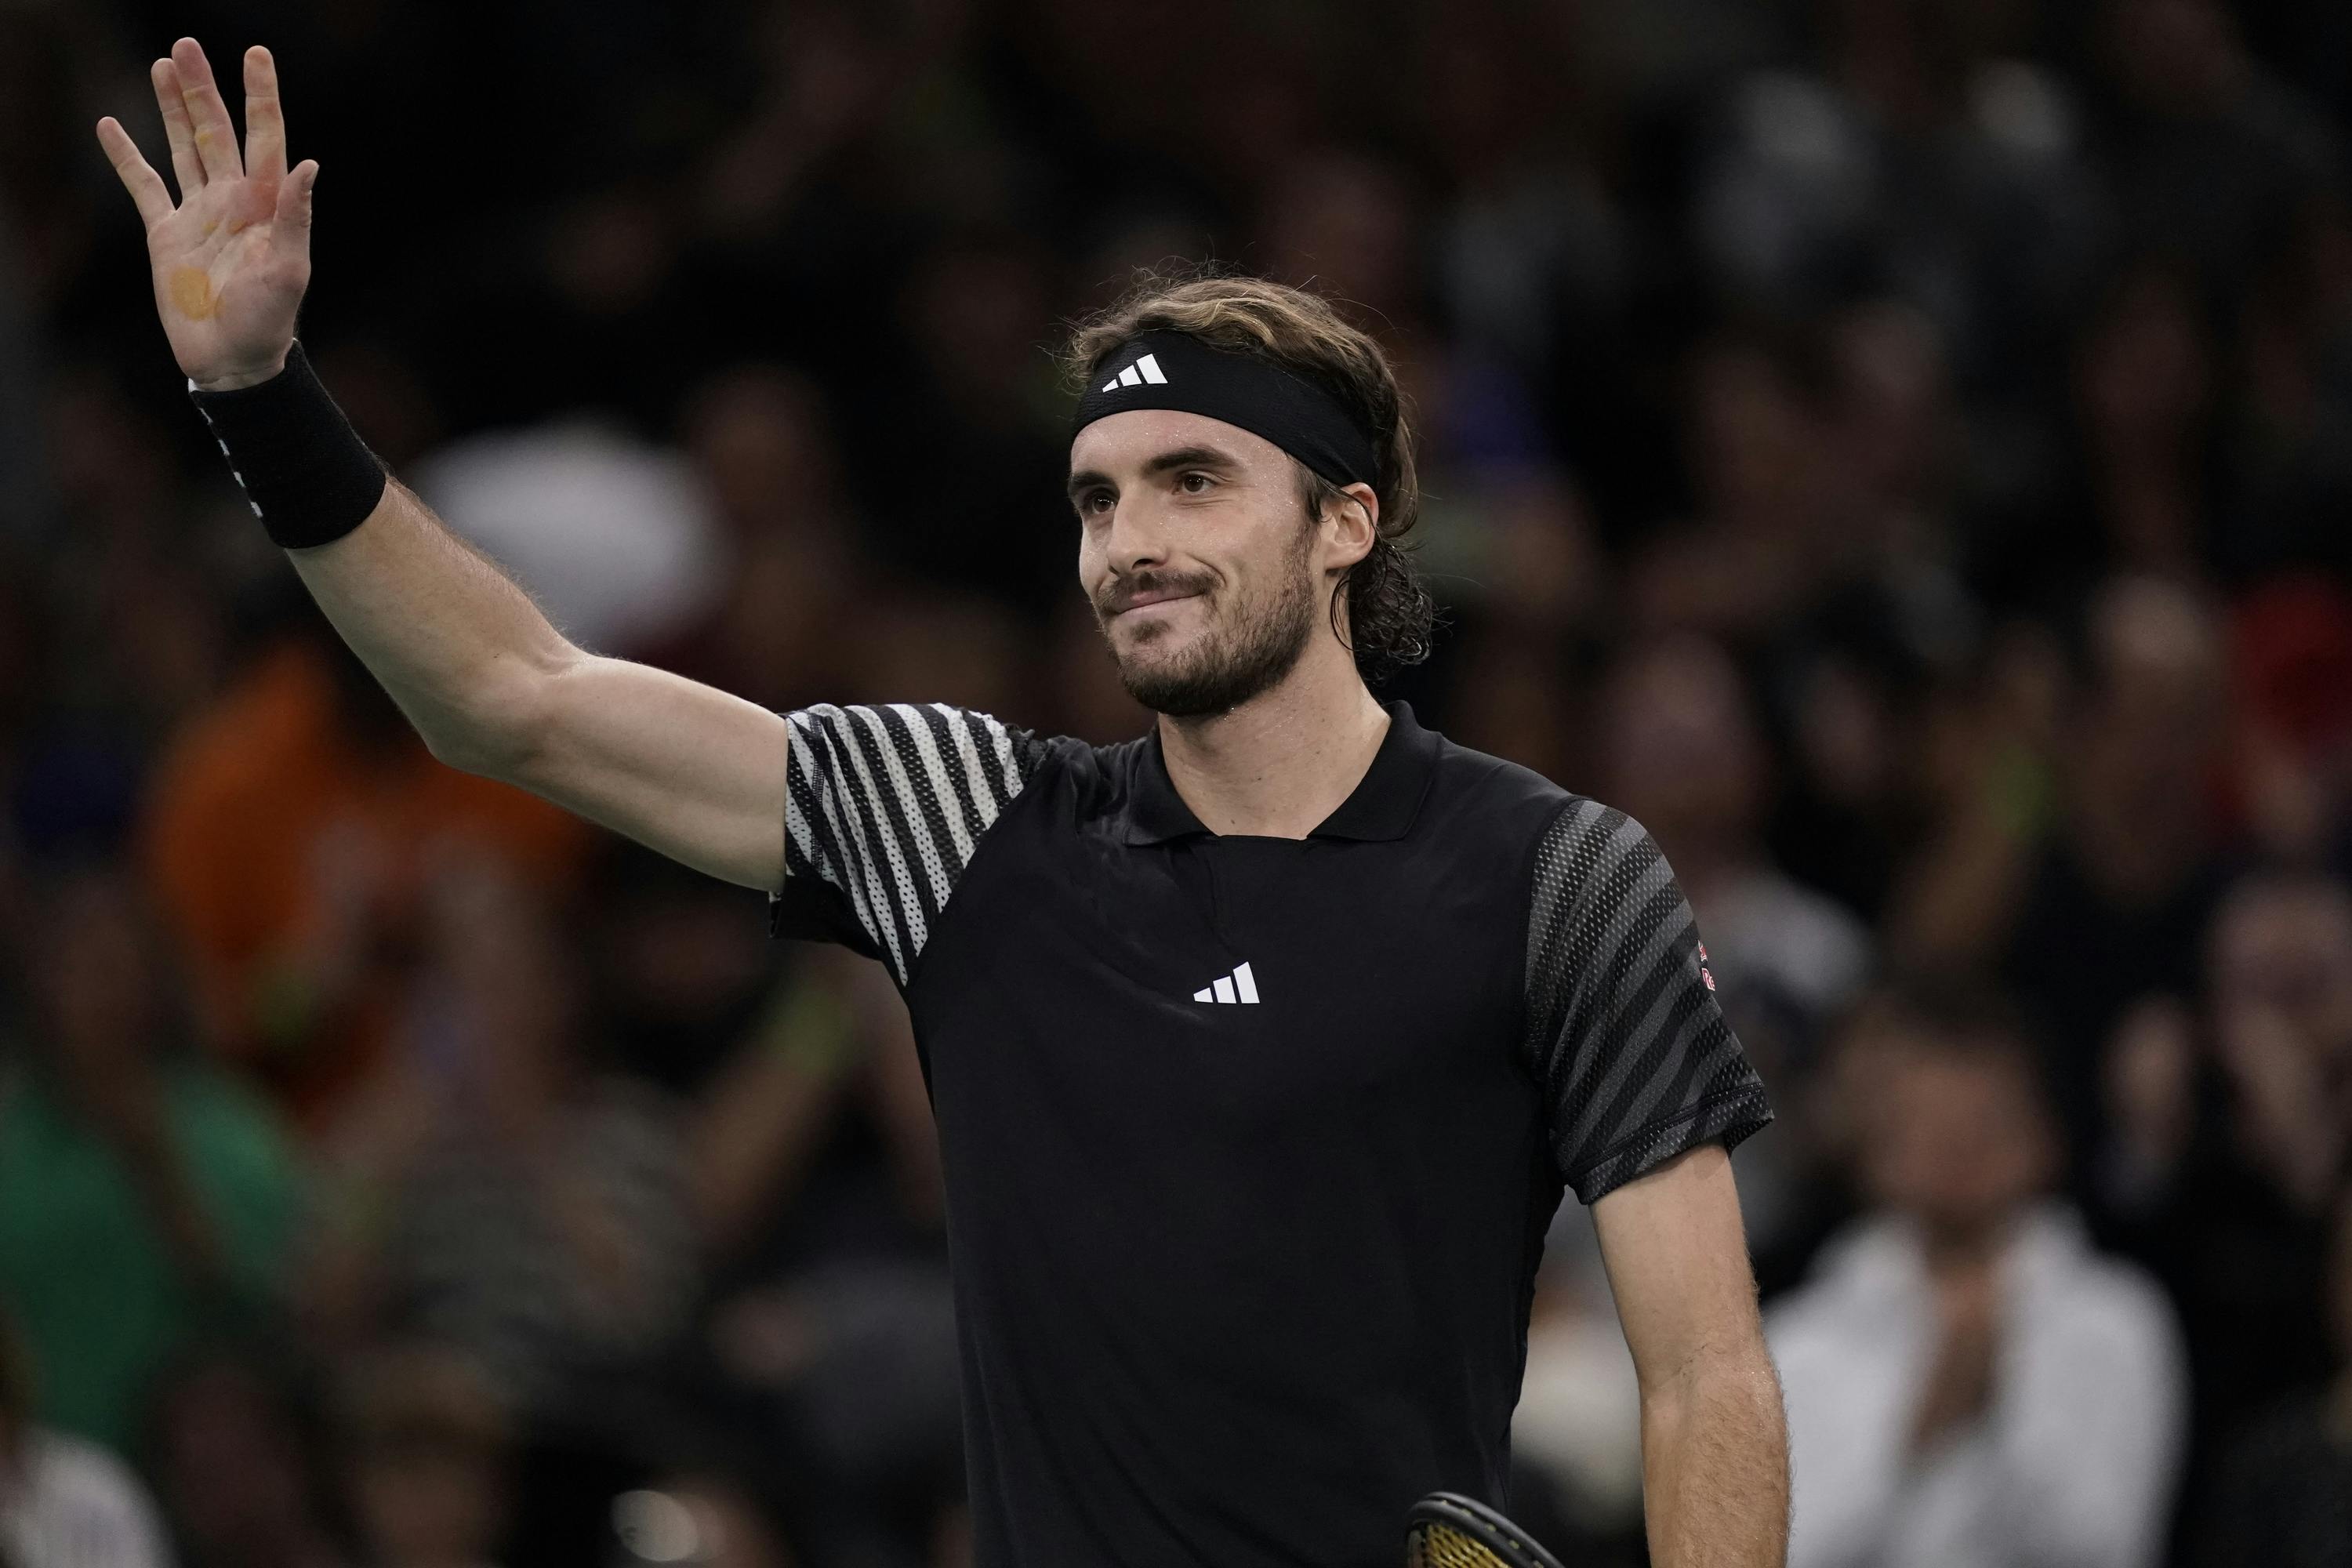 2023 Rolex Paris Masters: schedule, streaming services, and more